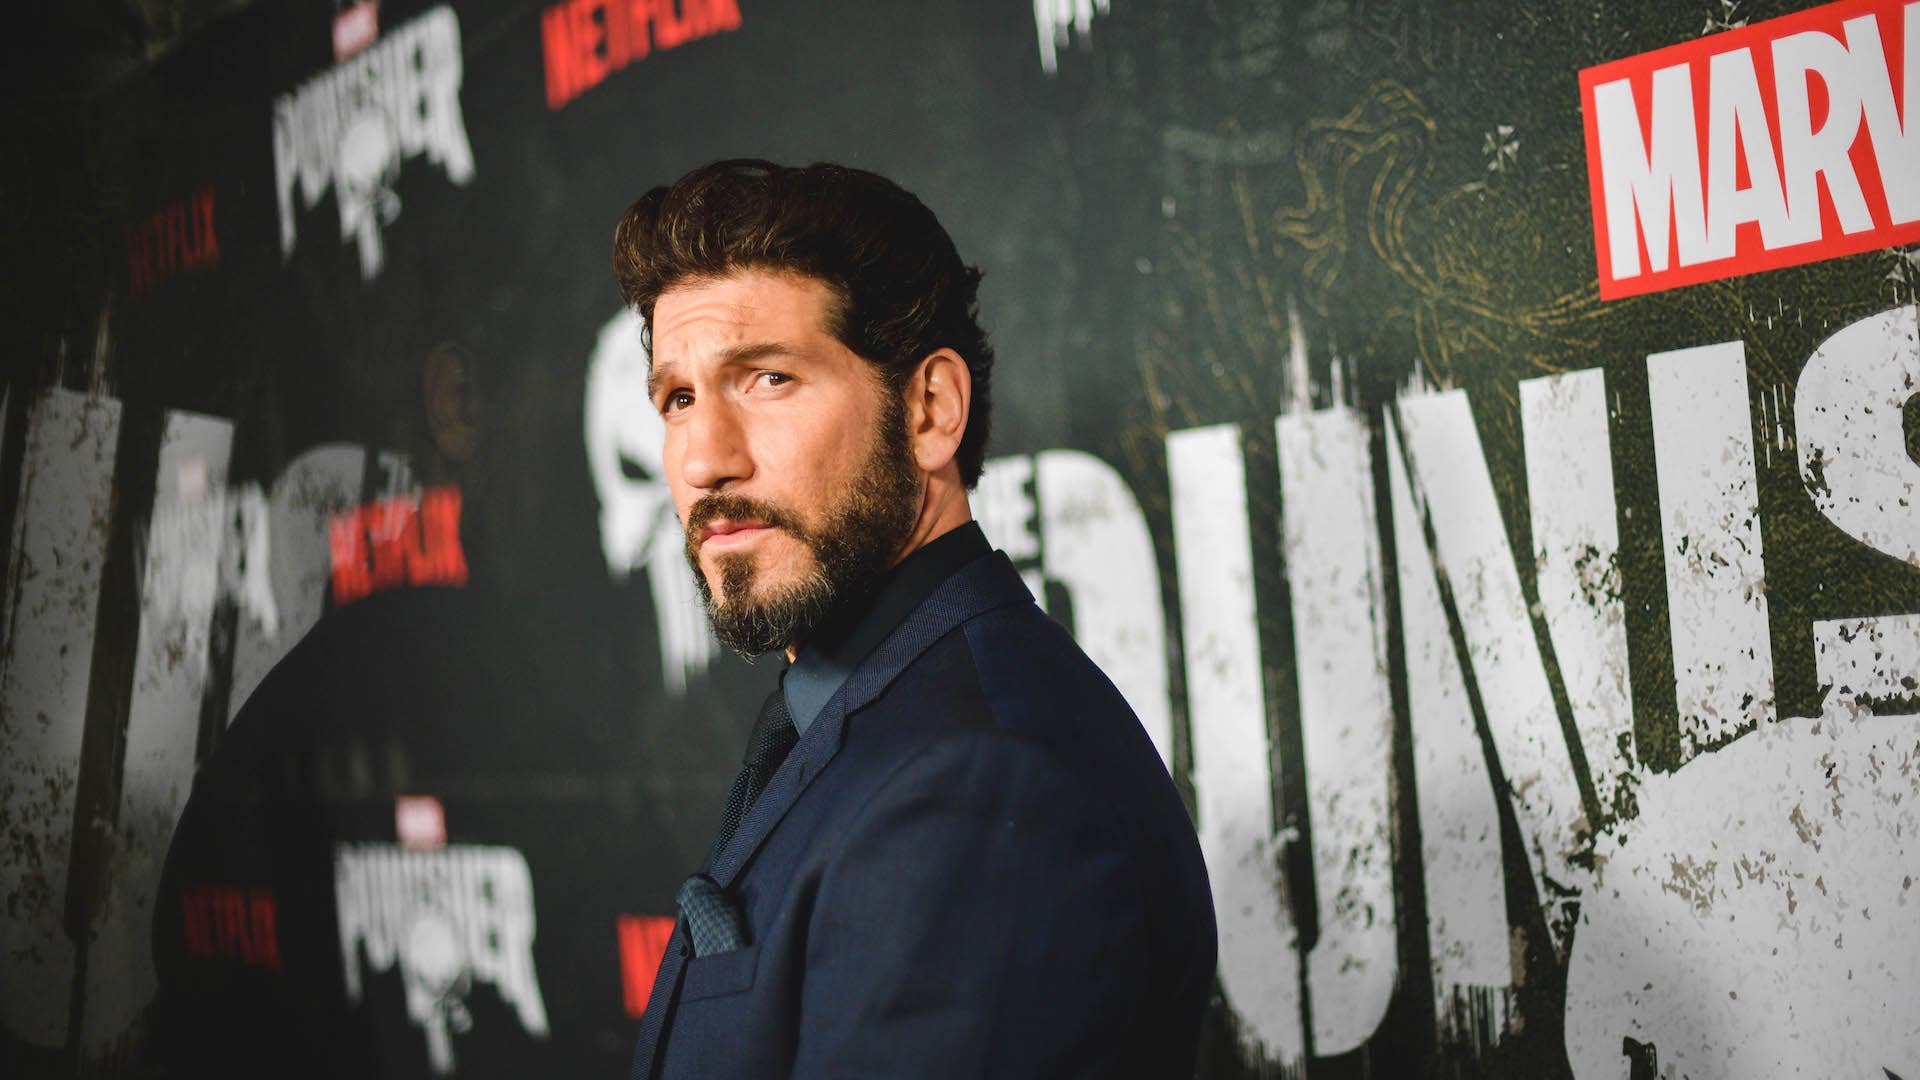 Jon Bernthal attends Marvel's "The Punisher" Los Angeles Premiere